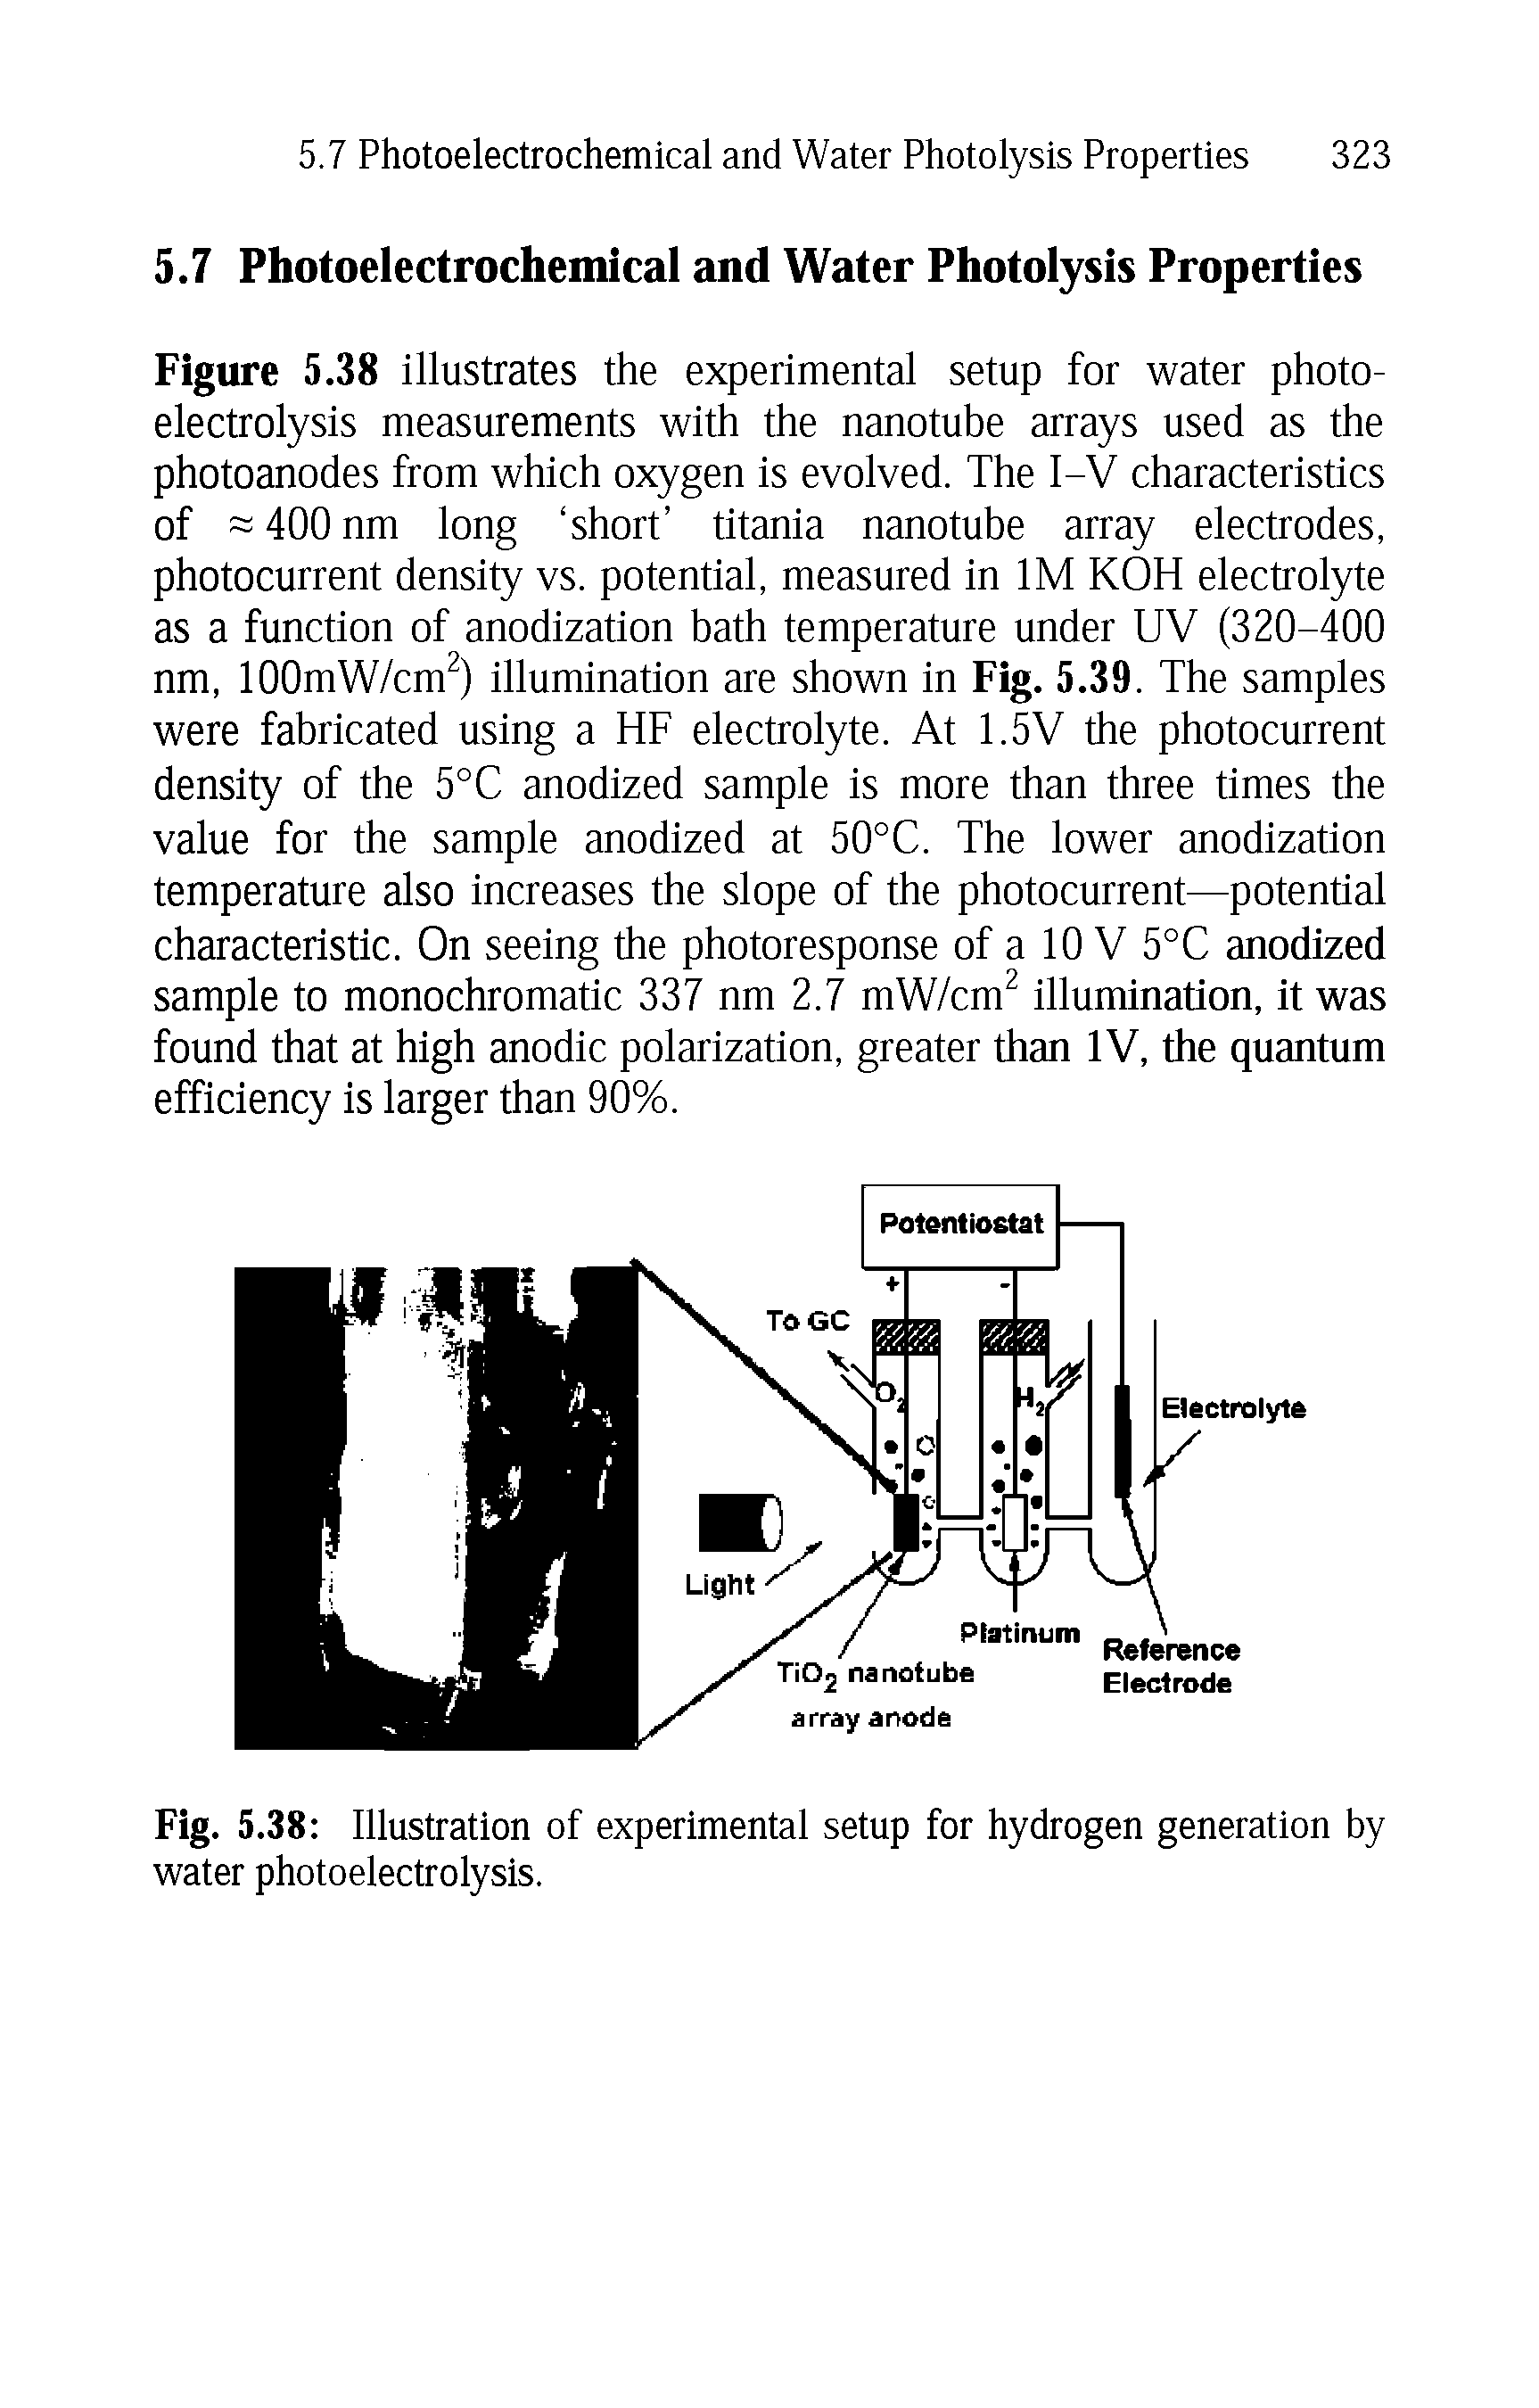 Figure 5.38 illustrates the experimental setup for water photoelectrolysis measurements with the nanotuhe arrays used as the photoanodes from which oxygen is evolved. The 1-V characteristics of 400 nm long short titania nanotuhe array electrodes, photocurrent density vs. potential, measured in IM KOH electrolyte as a function of anodization hath temperature under UV (320-400 nm, lOOmW/cm ) illumination are shown in Fig. 5.39. The samples were fabricated using a HF electrolyte. At 1.5V the photocurrent density of the 5°C anodized sample is more than three times the value for the sample anodized at 50°C. The lower anodization temperature also increases the slope of the photocurrent—potential characteristic. On seeing the photoresponse of a 10 V 5°C anodized sample to monochromatic 337 nm 2.7 mW/cm illumination, it was found that at high anodic polarization, greater than IV, the quantum efficiency is larger than 90%.